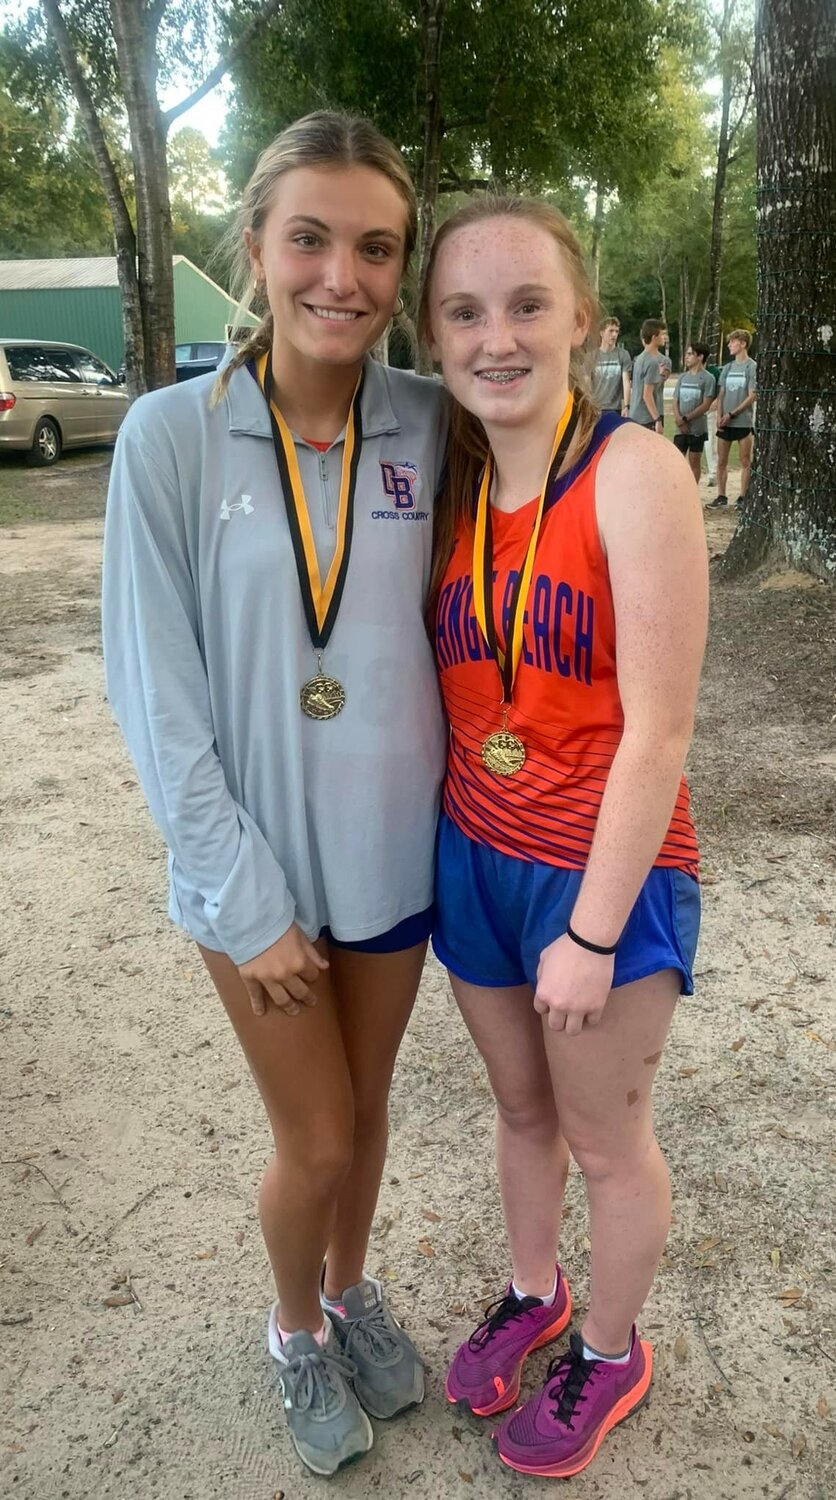 Orange Beach junior Libby Tierce and eighth-grader Brooke Barnett both earned top-10 finishes at the Baldwin County cross country championship meet Thursday afternoon to earn a spot on the All-County list. Tierce was a 10th-place finisher and Barnett registered 7th overall.